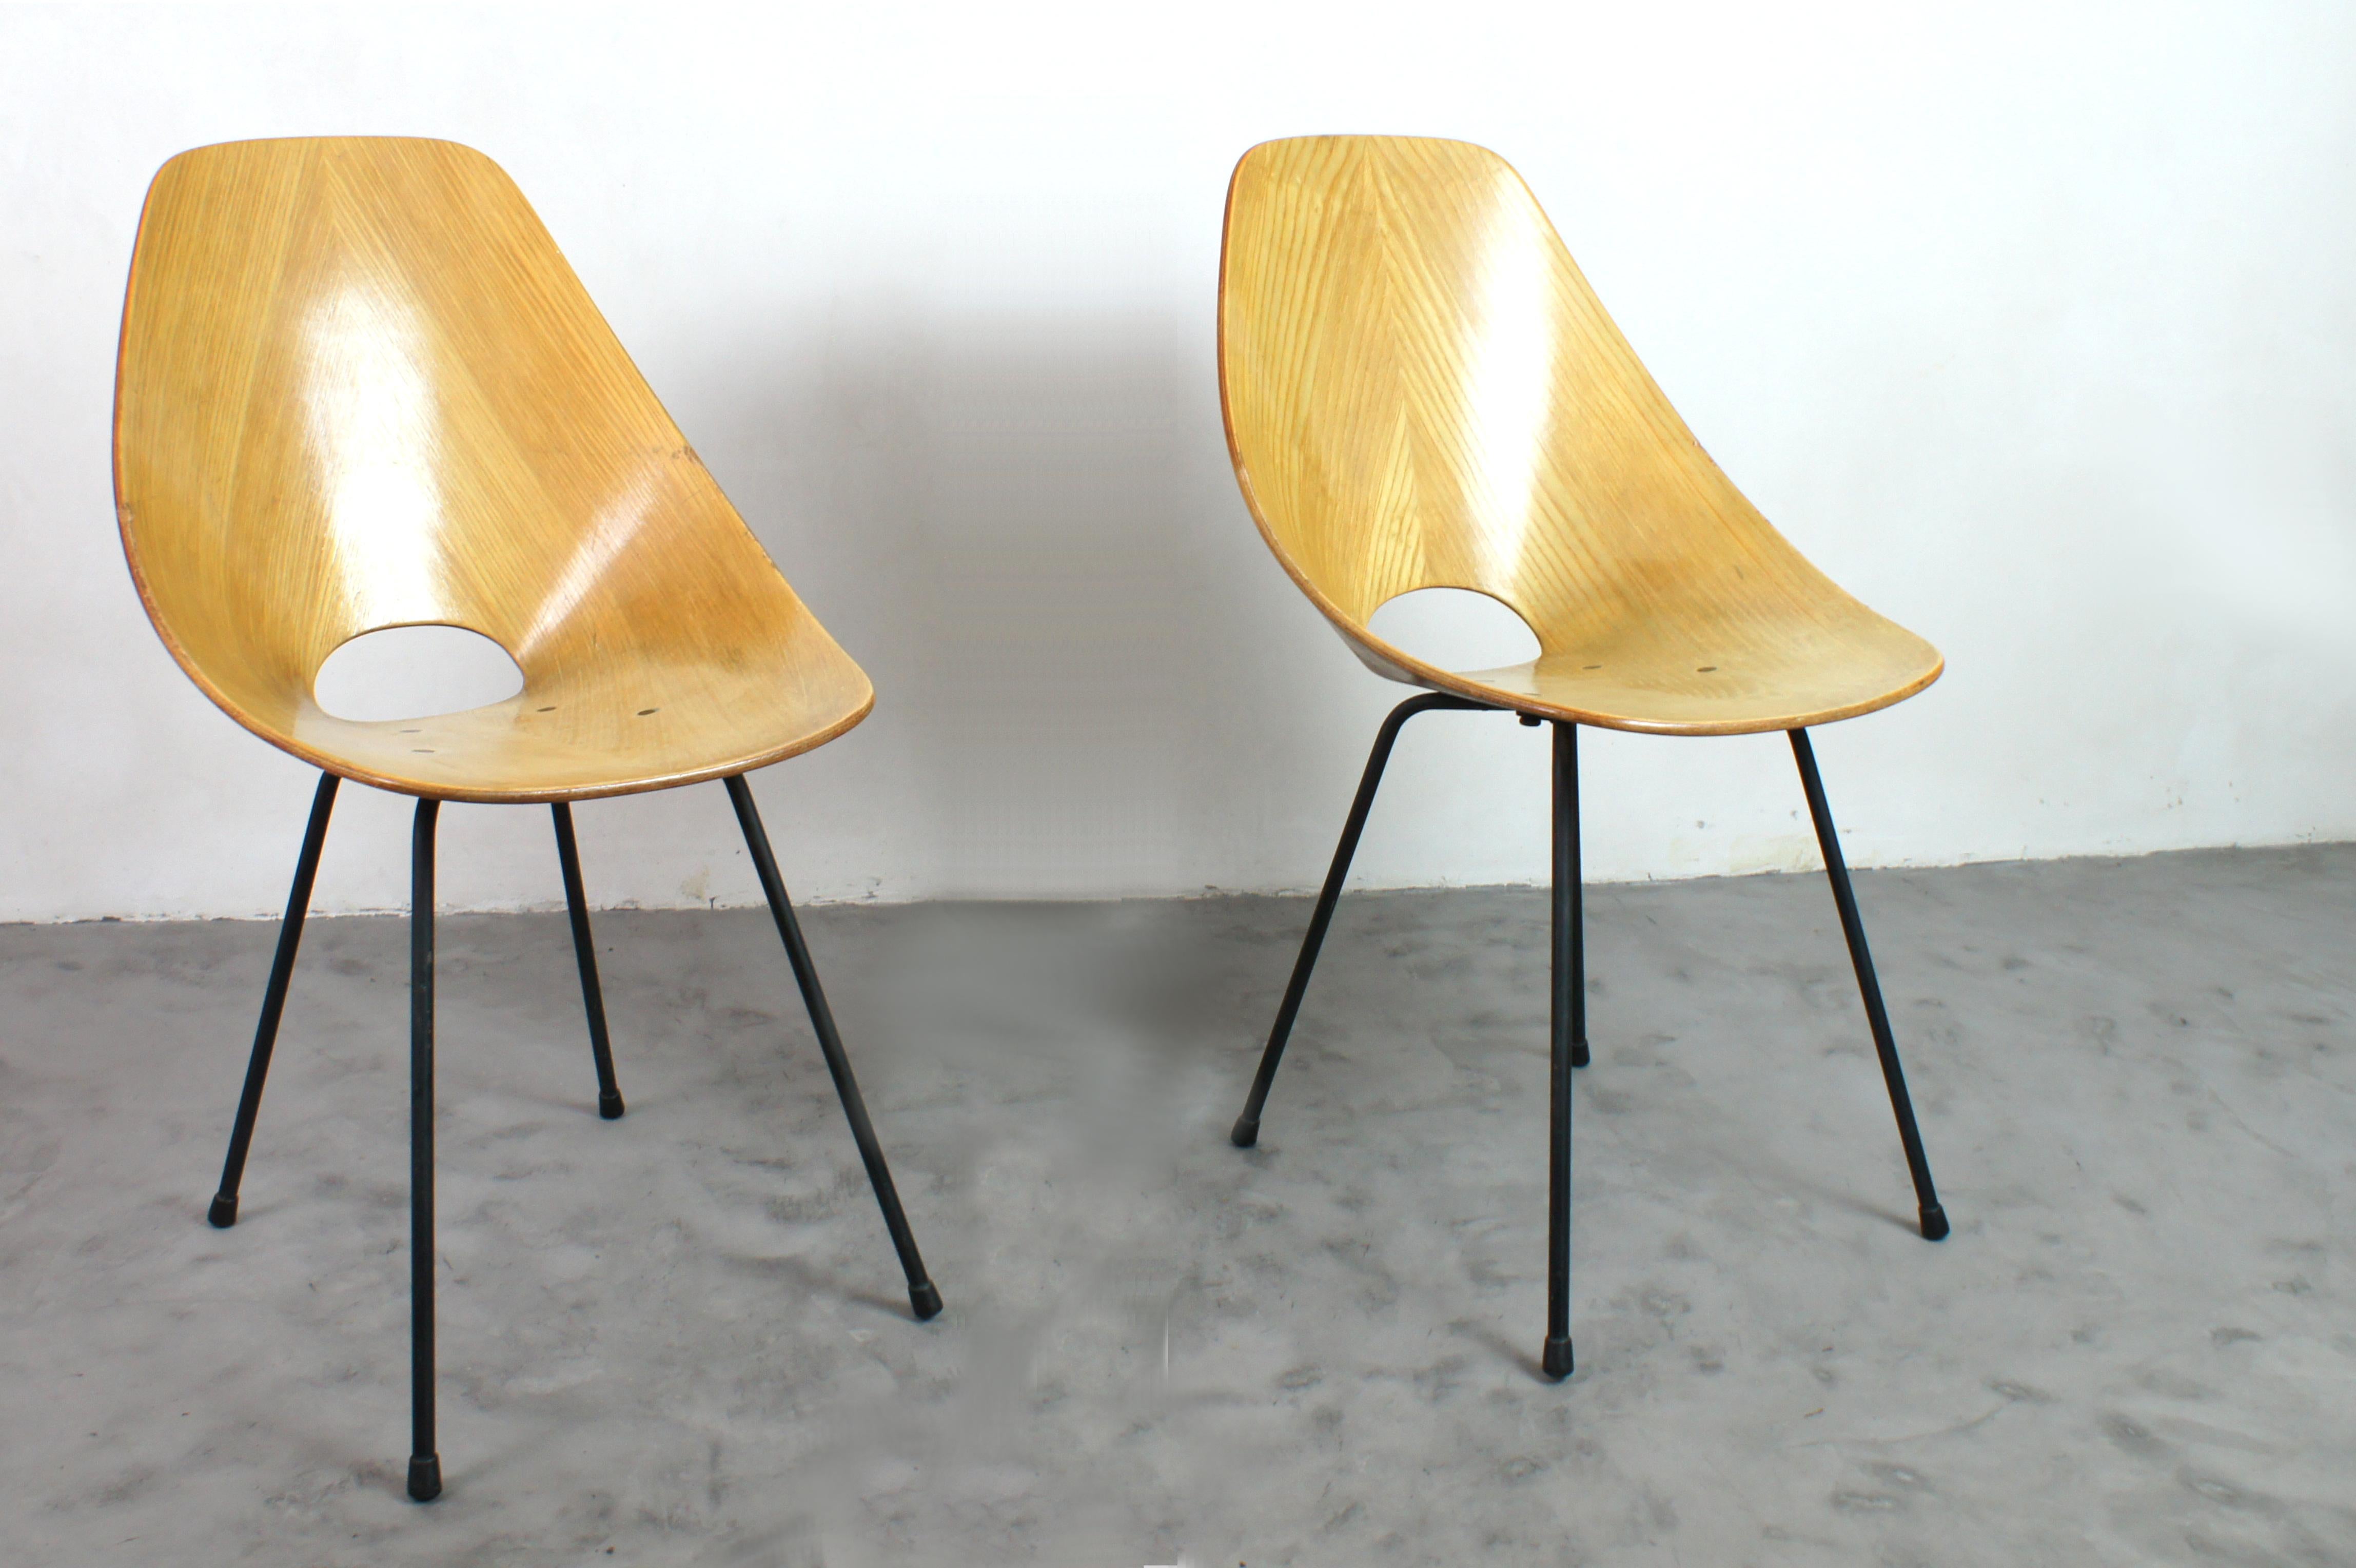 Pair of 'Medea' chairs designed by vittorio nobili and produced by tagliabue brothers. italy in the 1950s.
Curved multilayer birch wood.
Consistent patina with age and use.
Solid , stable and sturdy. 